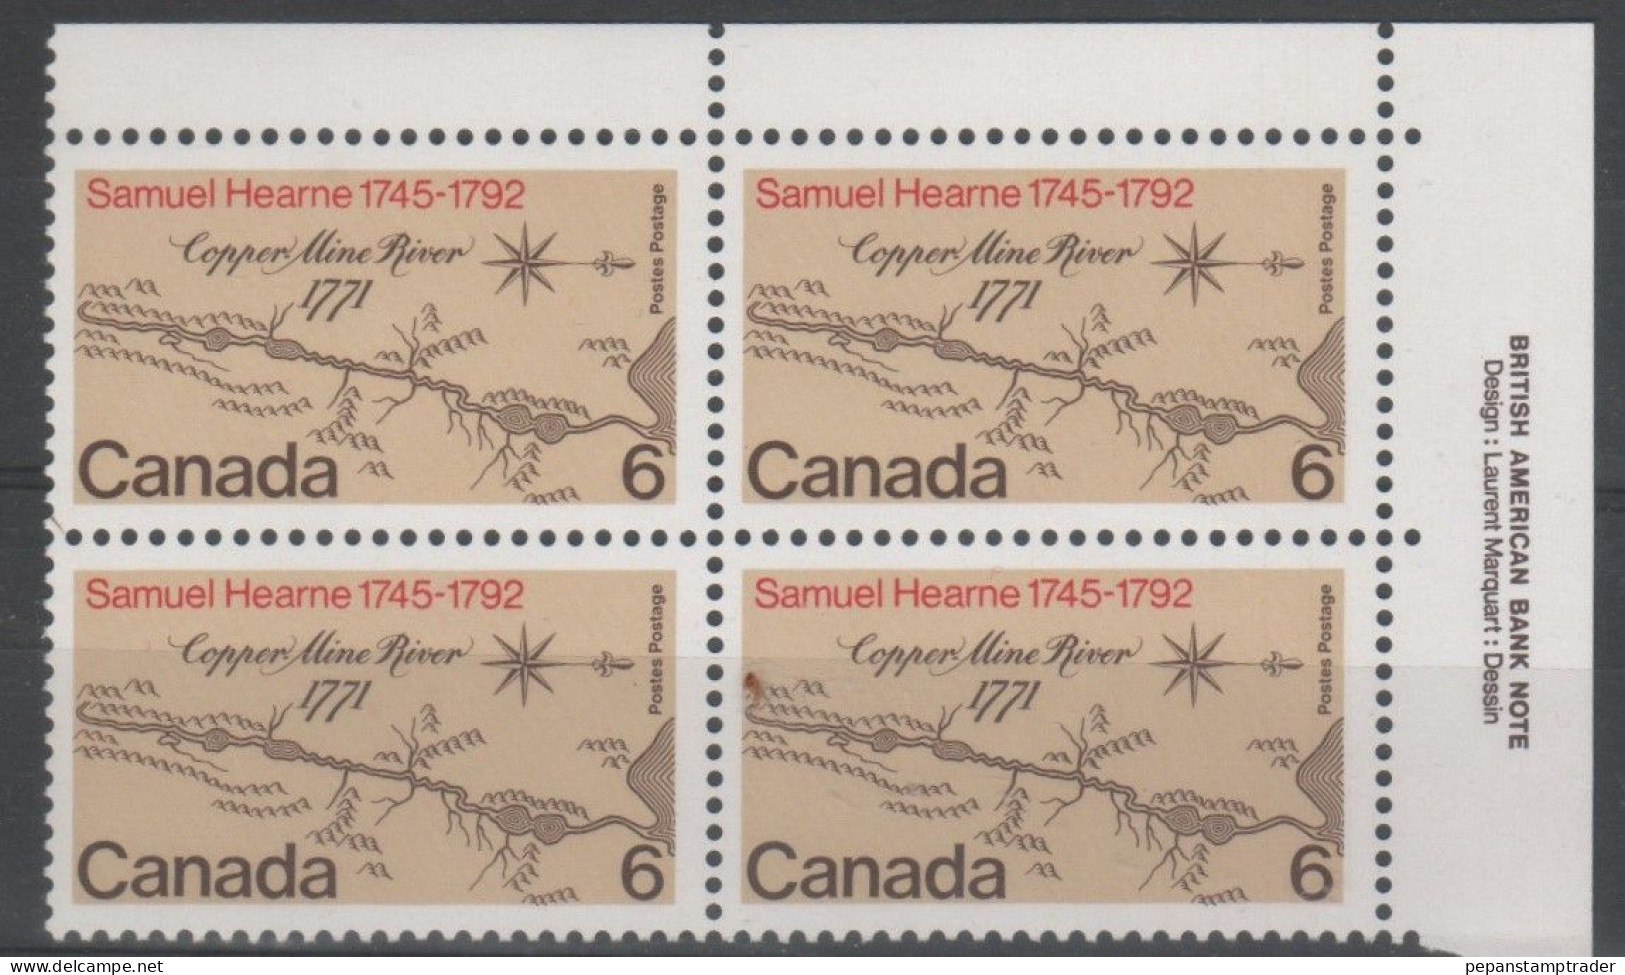 Canada - #540 - MNH PB - Plate Number & Inscriptions